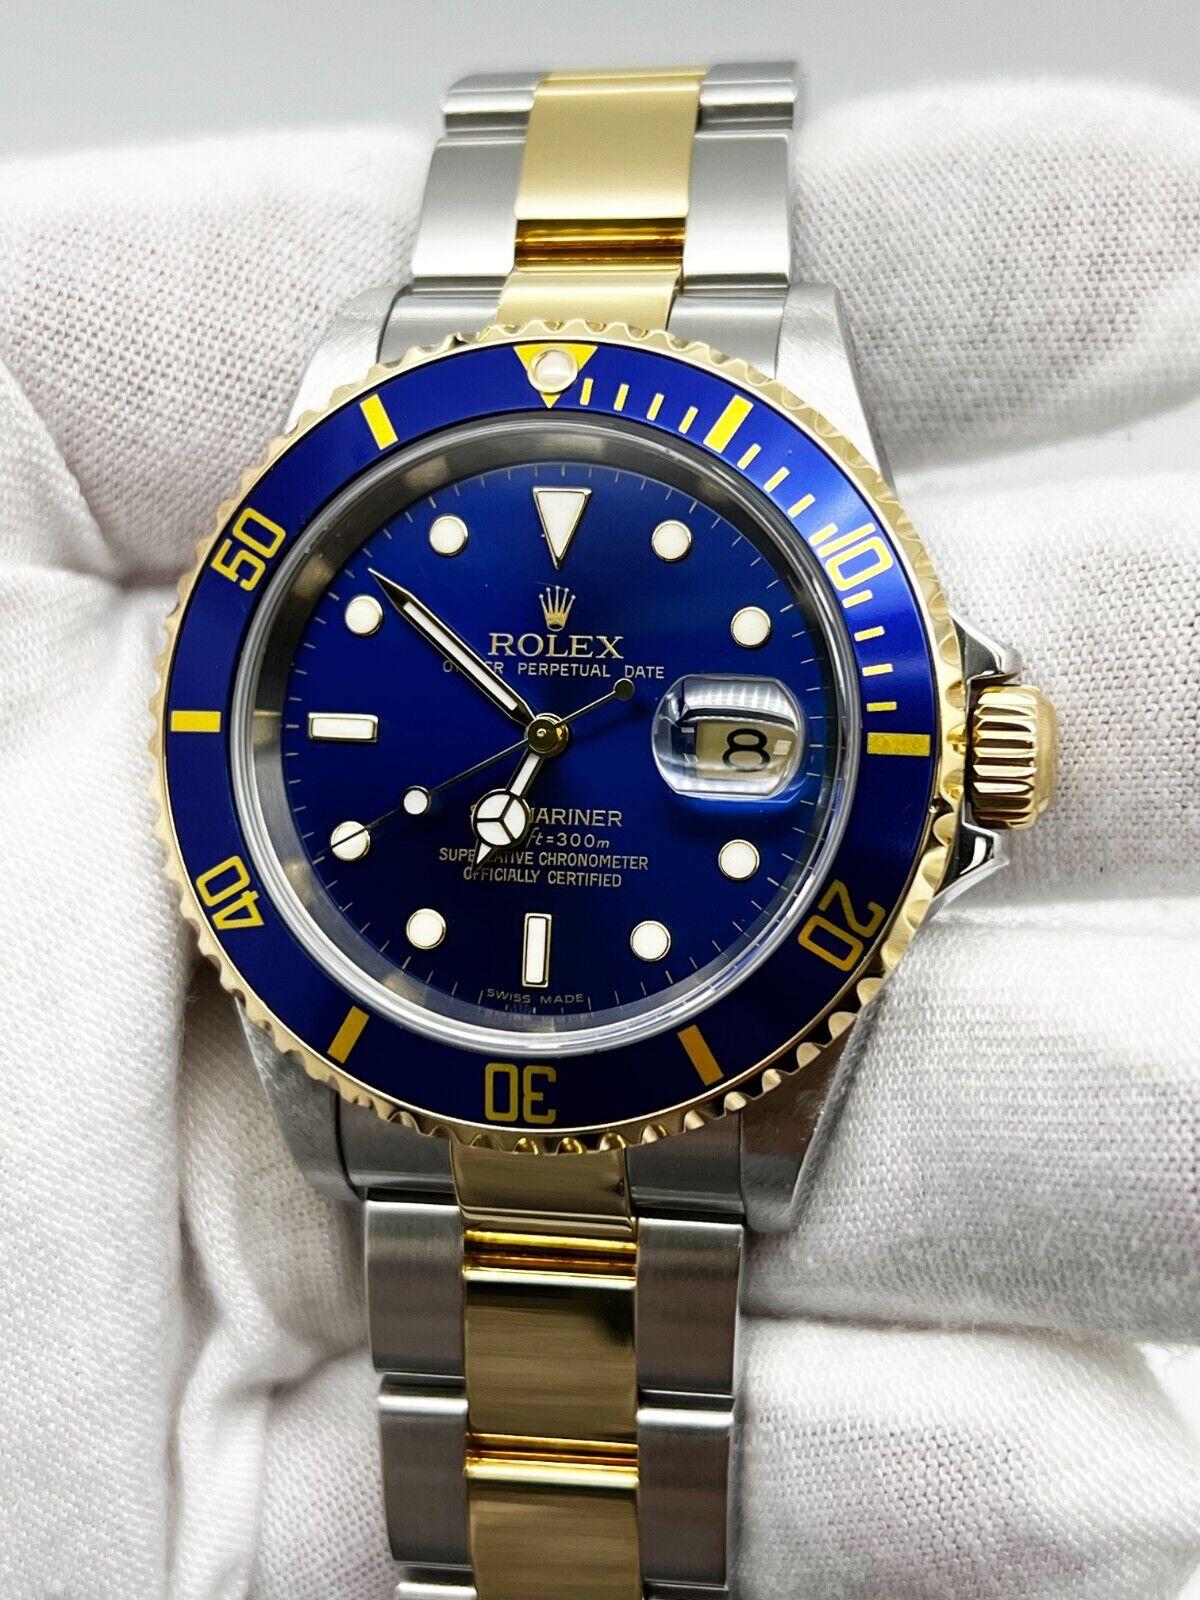 Style Number: 16613

Serial: D571***

Year: 2006
 
Model: Submariner 
 
Case Material: Stainless Steel 
 
Band: 18K Yellow Gold & Stainless Steel 
 
Bezel: Blue 
 
Dial: Blue 
 
Face: Sapphire Crystal 
 
Case Size: 40mm
 
Includes: 
-Rolex Box &